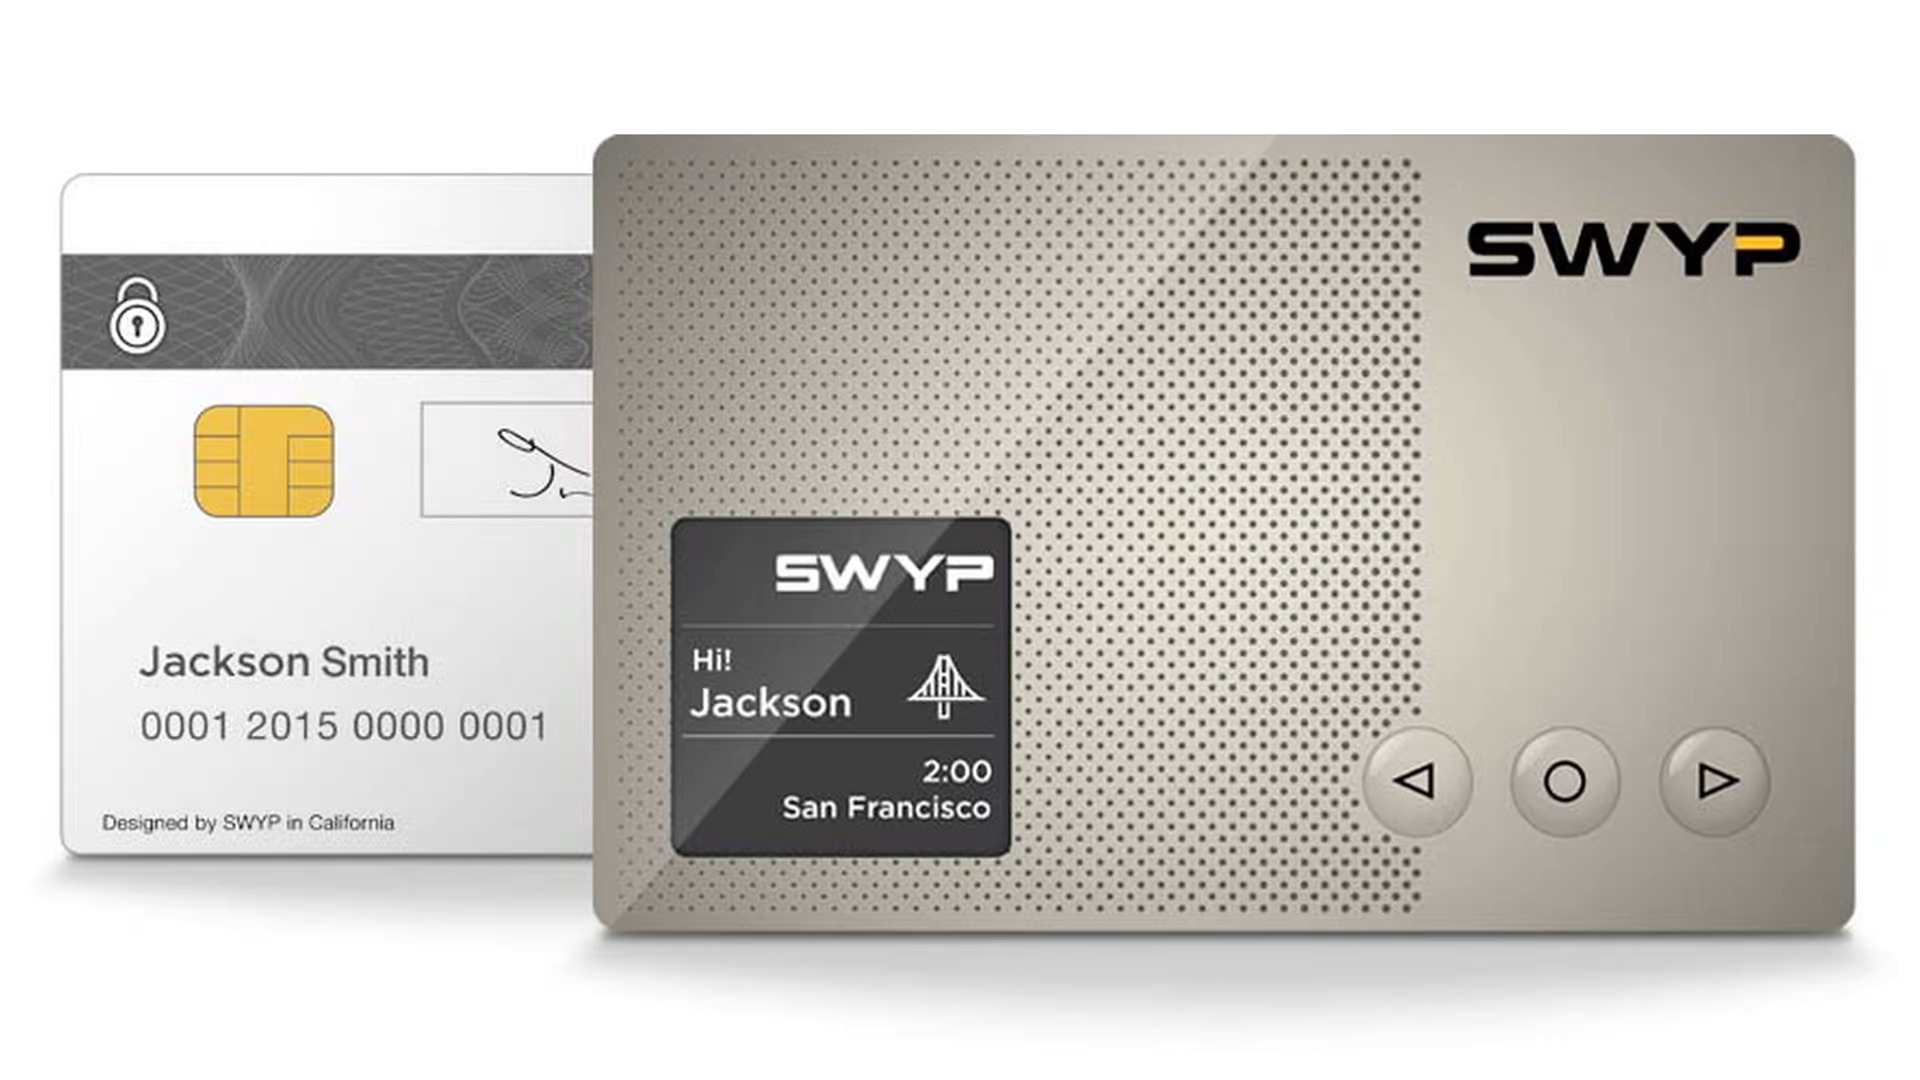 swyp-holds-25-credit-cards-news-release-date